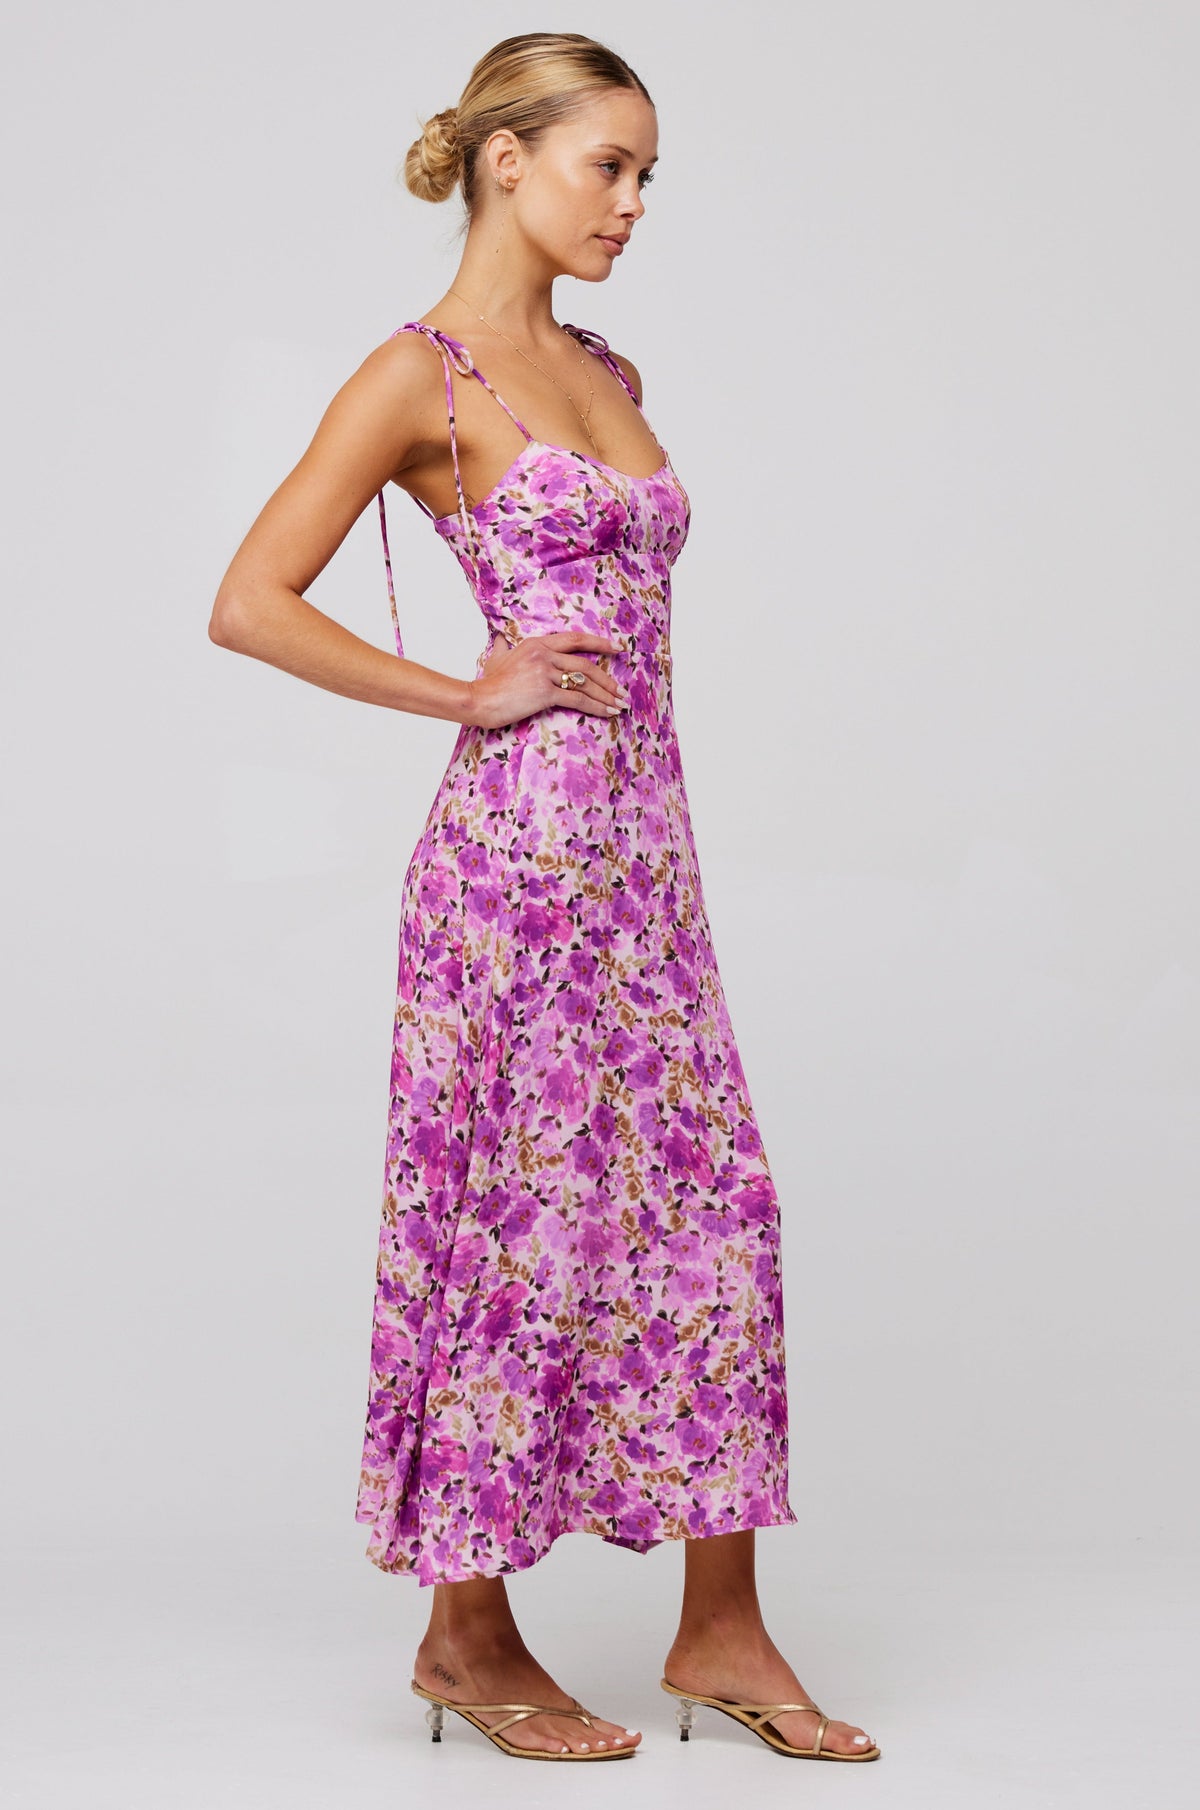 This is an image of Mandi Dress in Lilac - RESA featuring a model wearing the dress